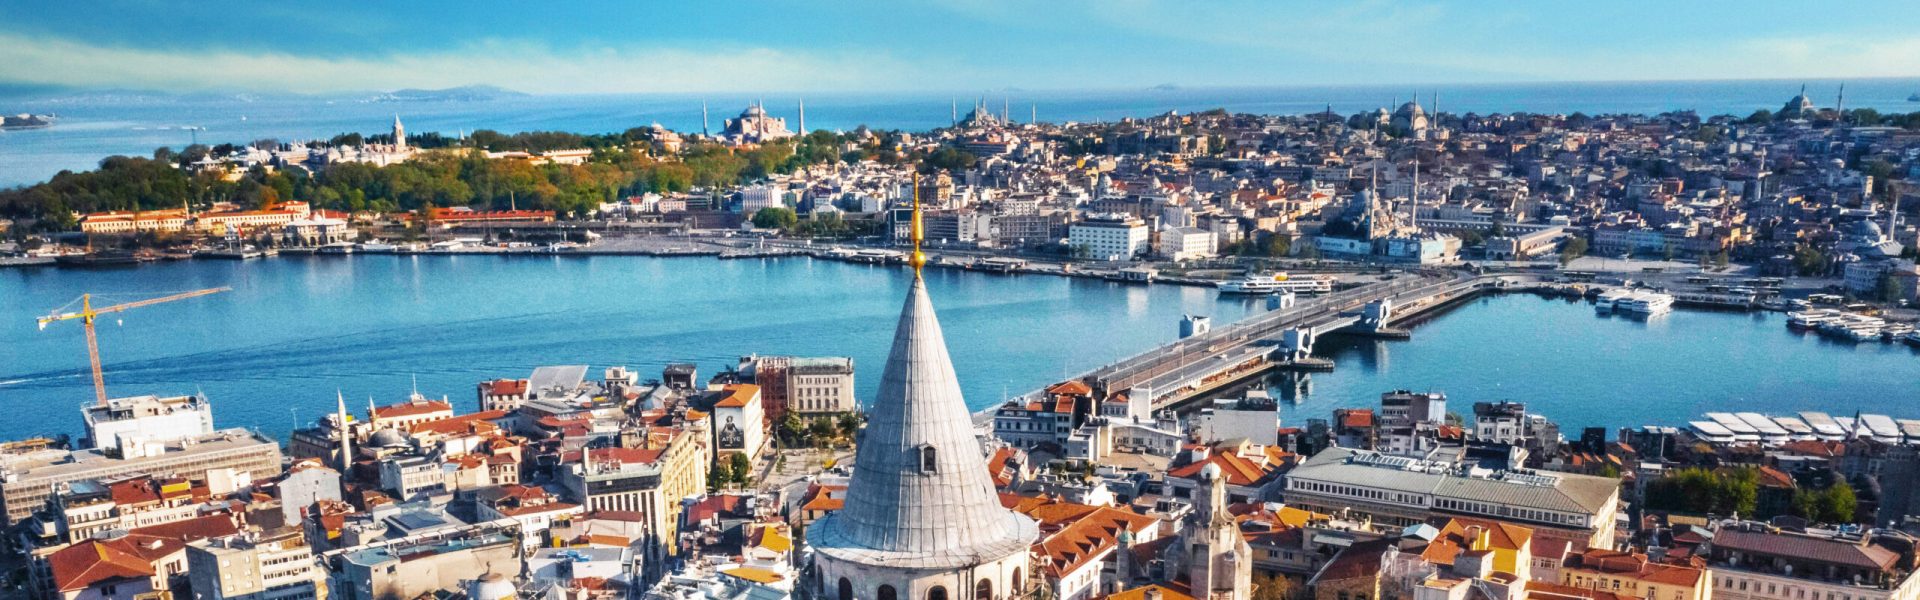 Aerial view of Galata Tower ,Blue Mosque & Hagia sophia (ayasofya)  in Istanbul; Shutterstock ID 1746993107; purchase_order: -; job: -; client: -; other: -